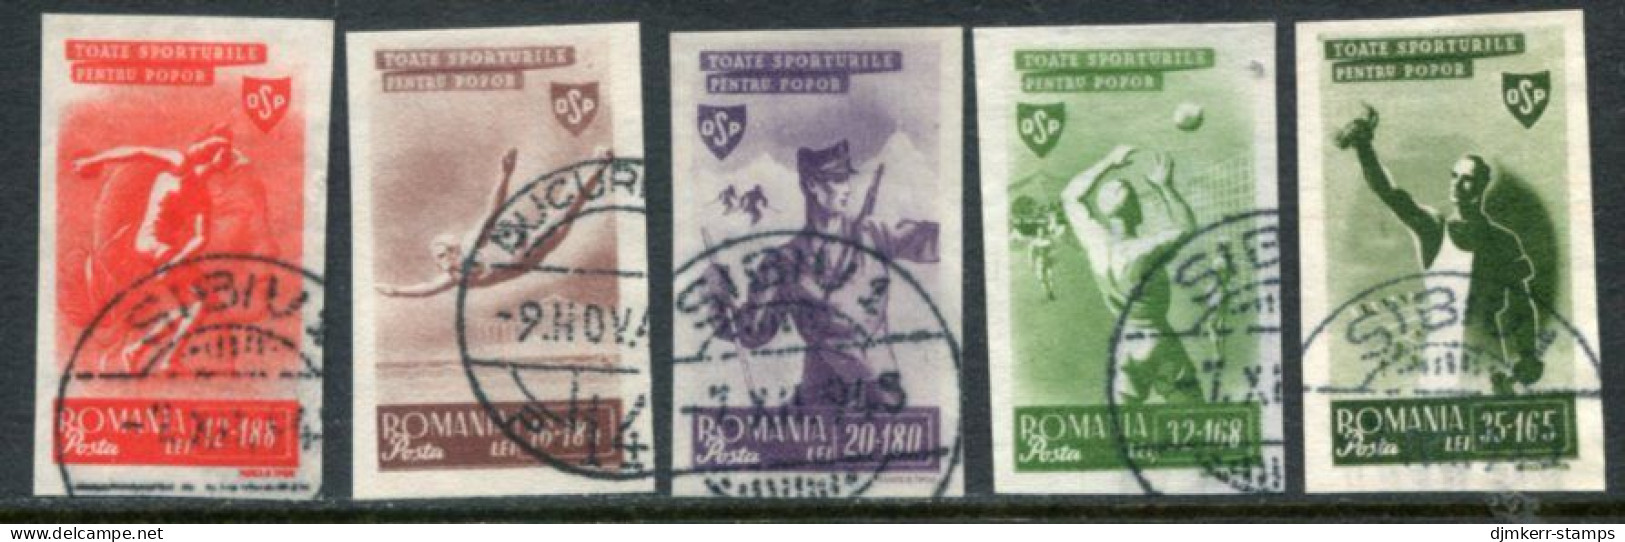 ROMANIA 1945 People's Sport Imperforate Used. Michel 879-83 - Gebraucht